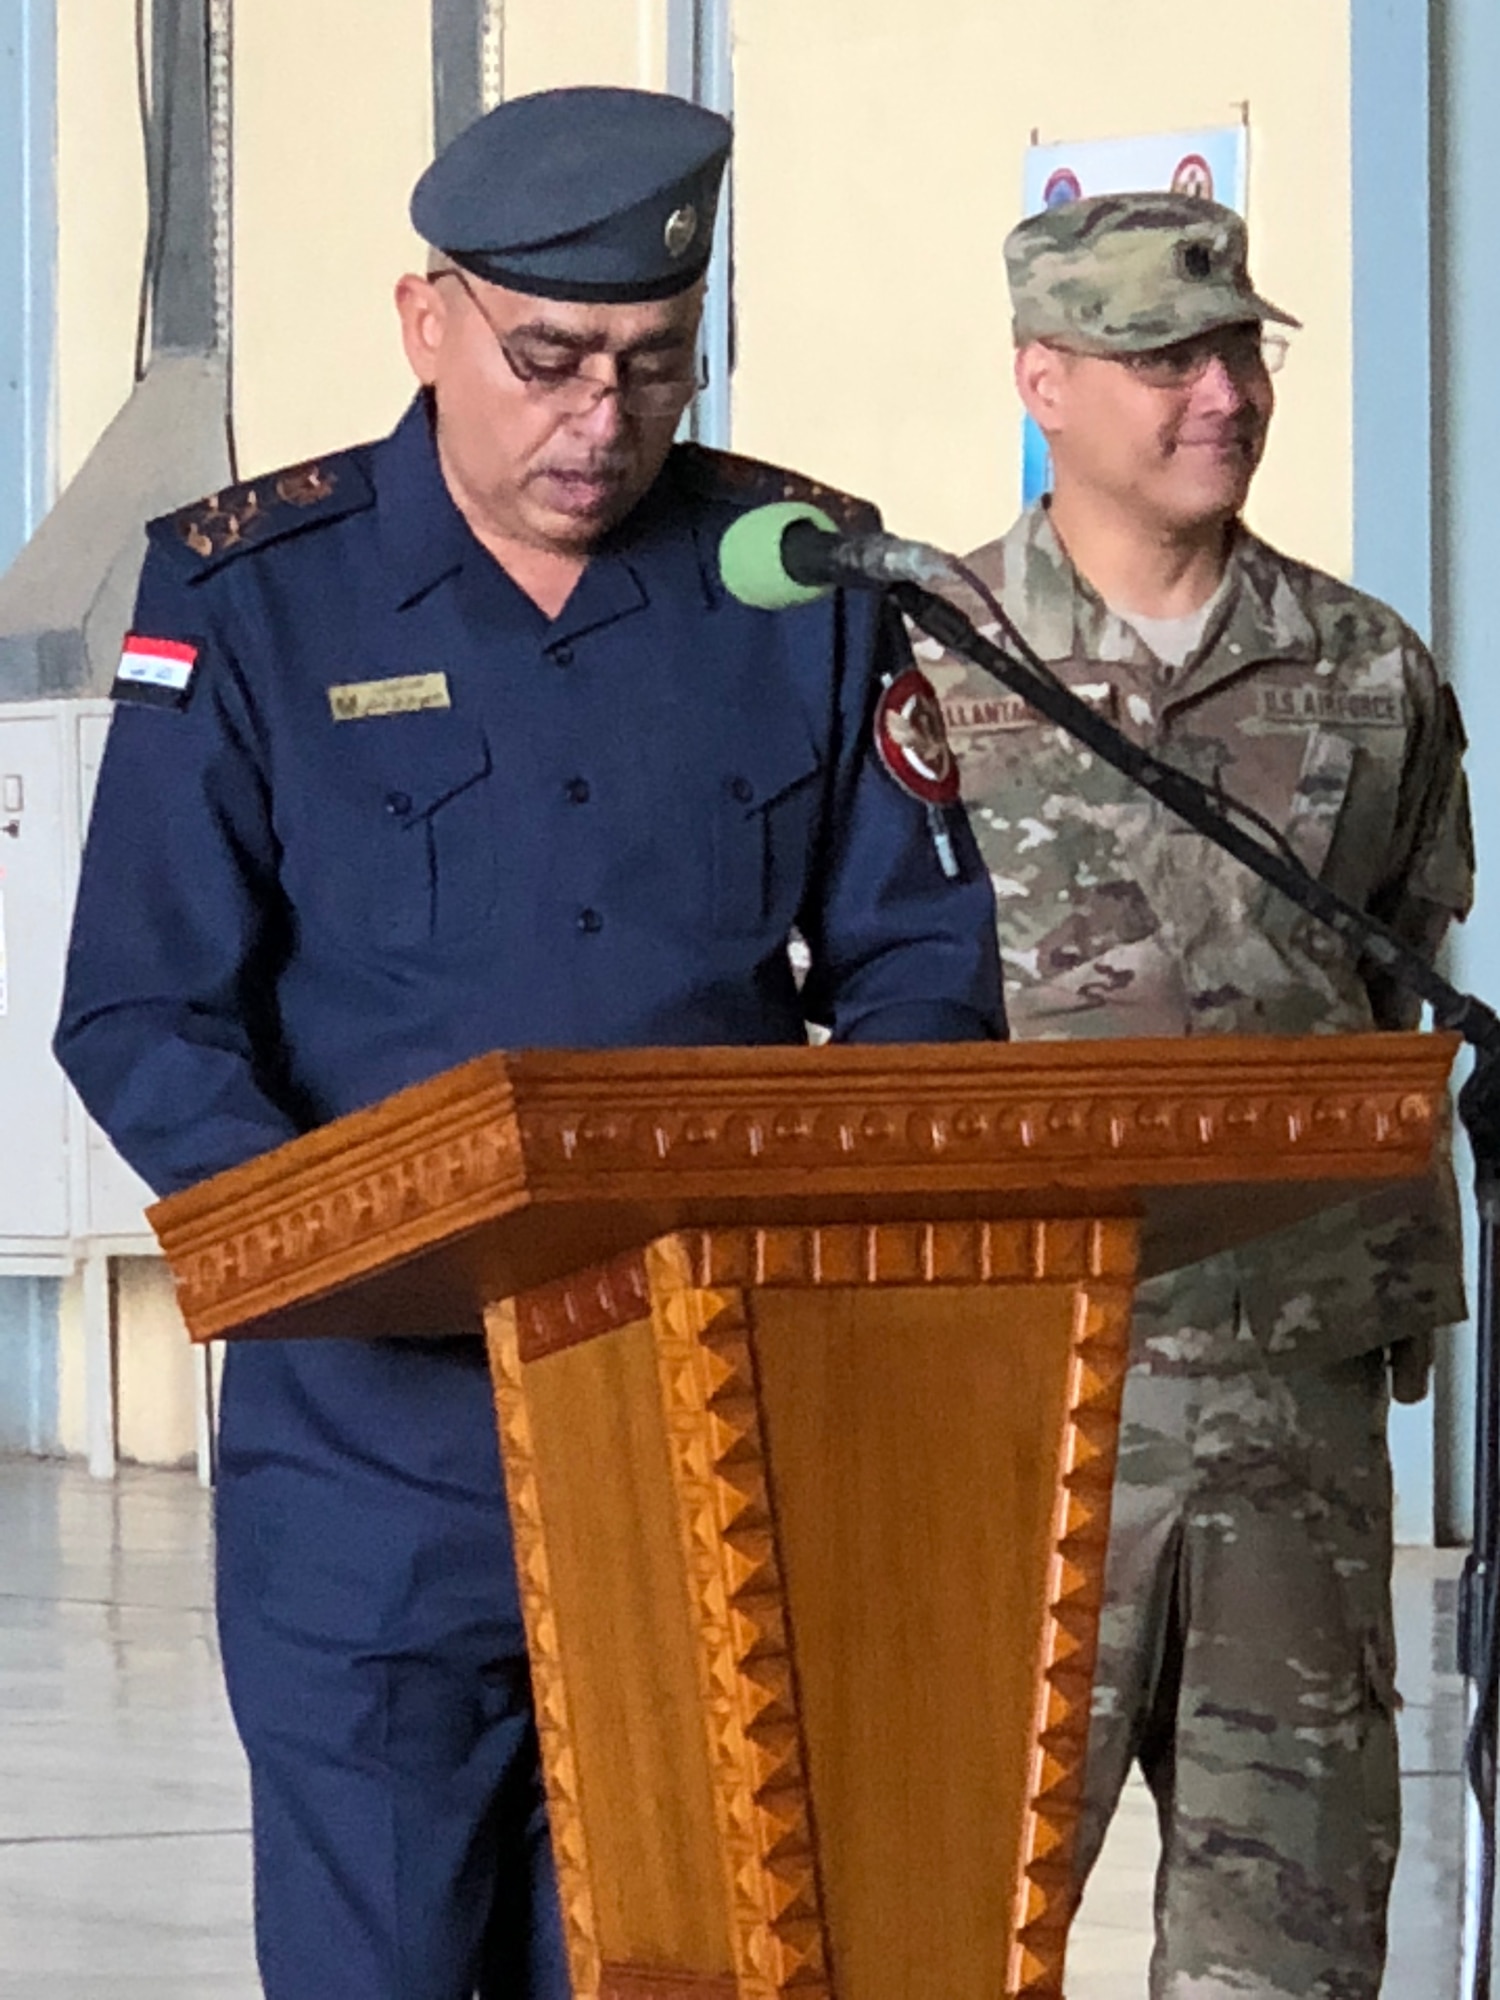 The new capability to train and certify craftsman technicians will enable the government of Iraq to redirect funds away from contractor requirements to efforts of rebuilding infrastructure and cities and promoting stability and economic progression.